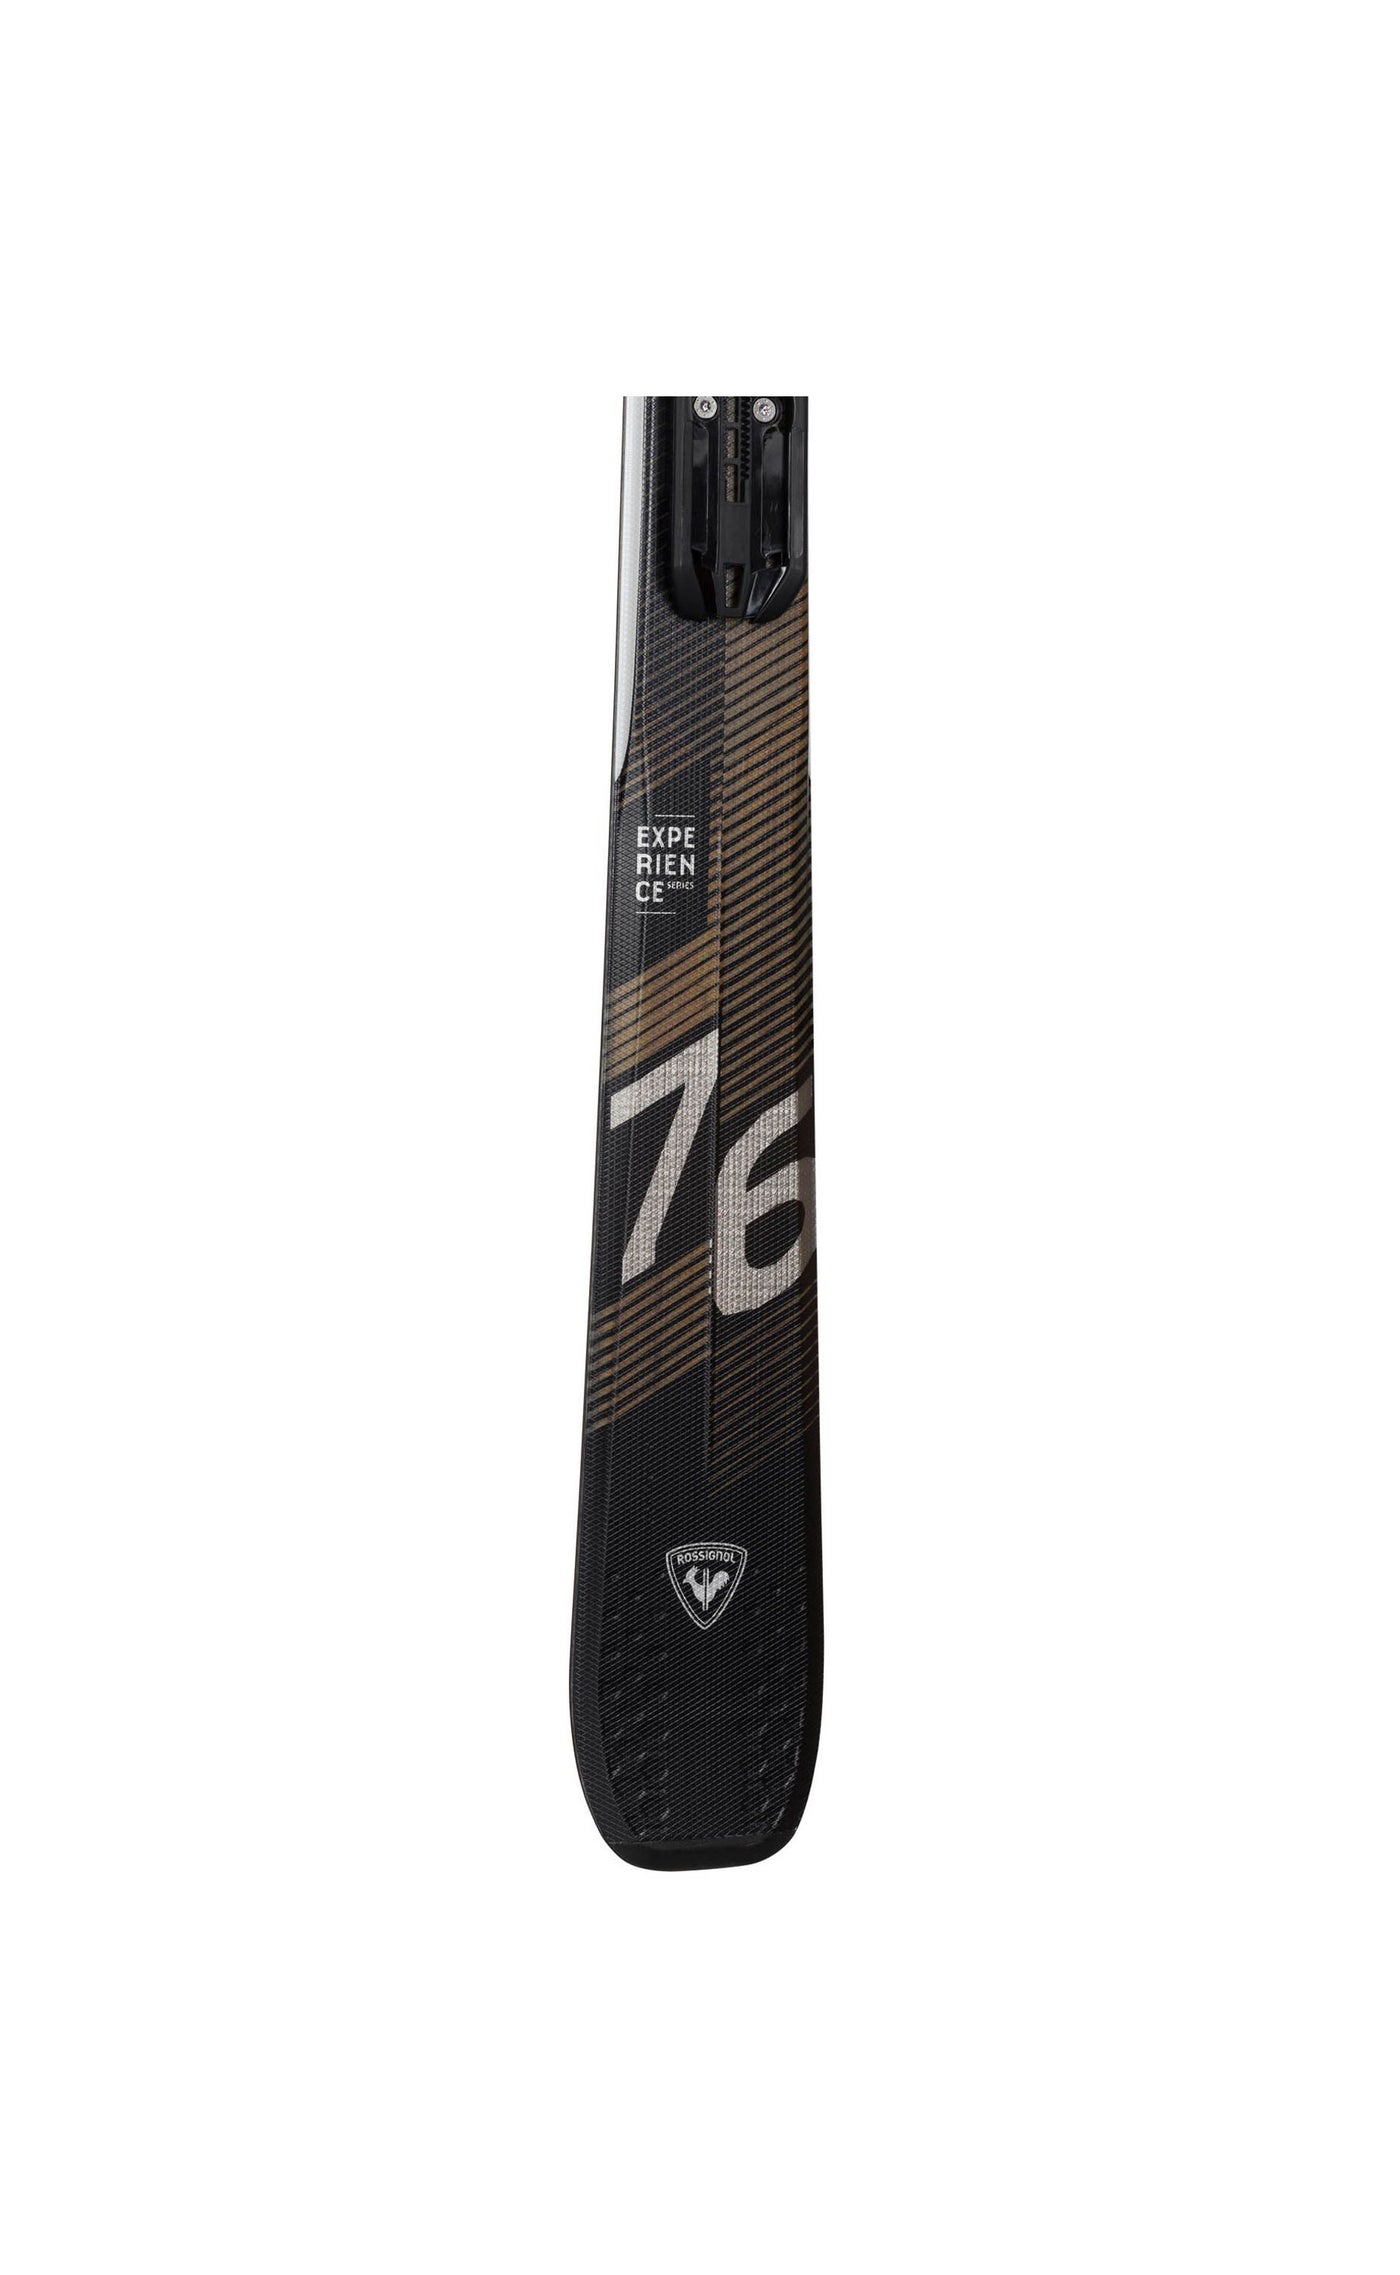 SKIS ROSSIGNOL MEN'S ALL MOUNTAIN SKIS EXPERIENCE 76CI XPRESS BINDINGS - Alleydesigns  Pty Ltd                                             ABN: 44165571264